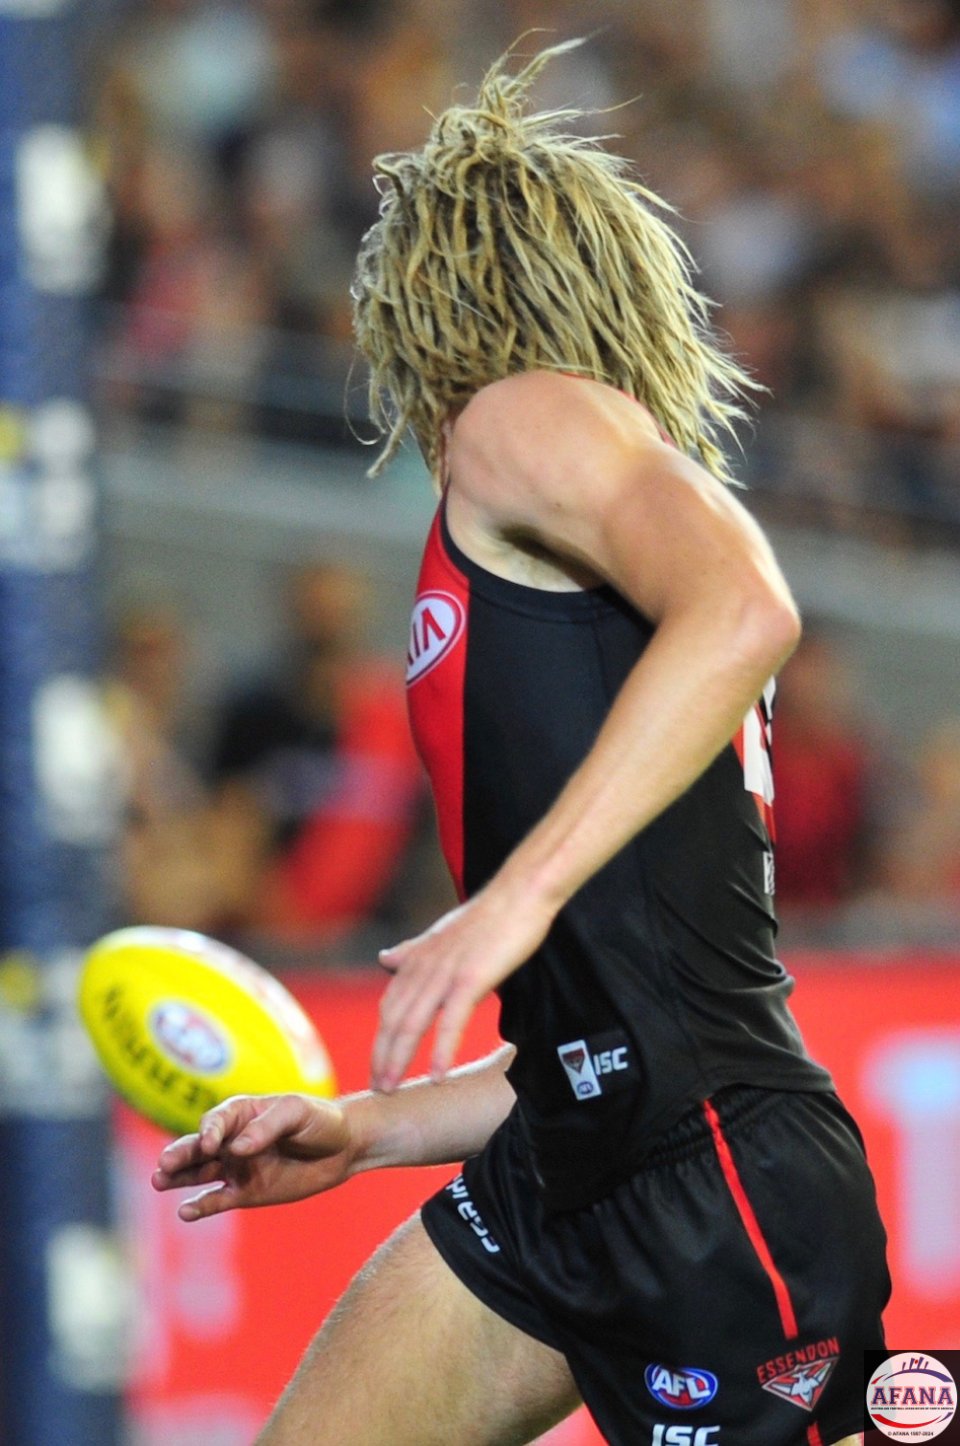 Heppell scores from a tight angle